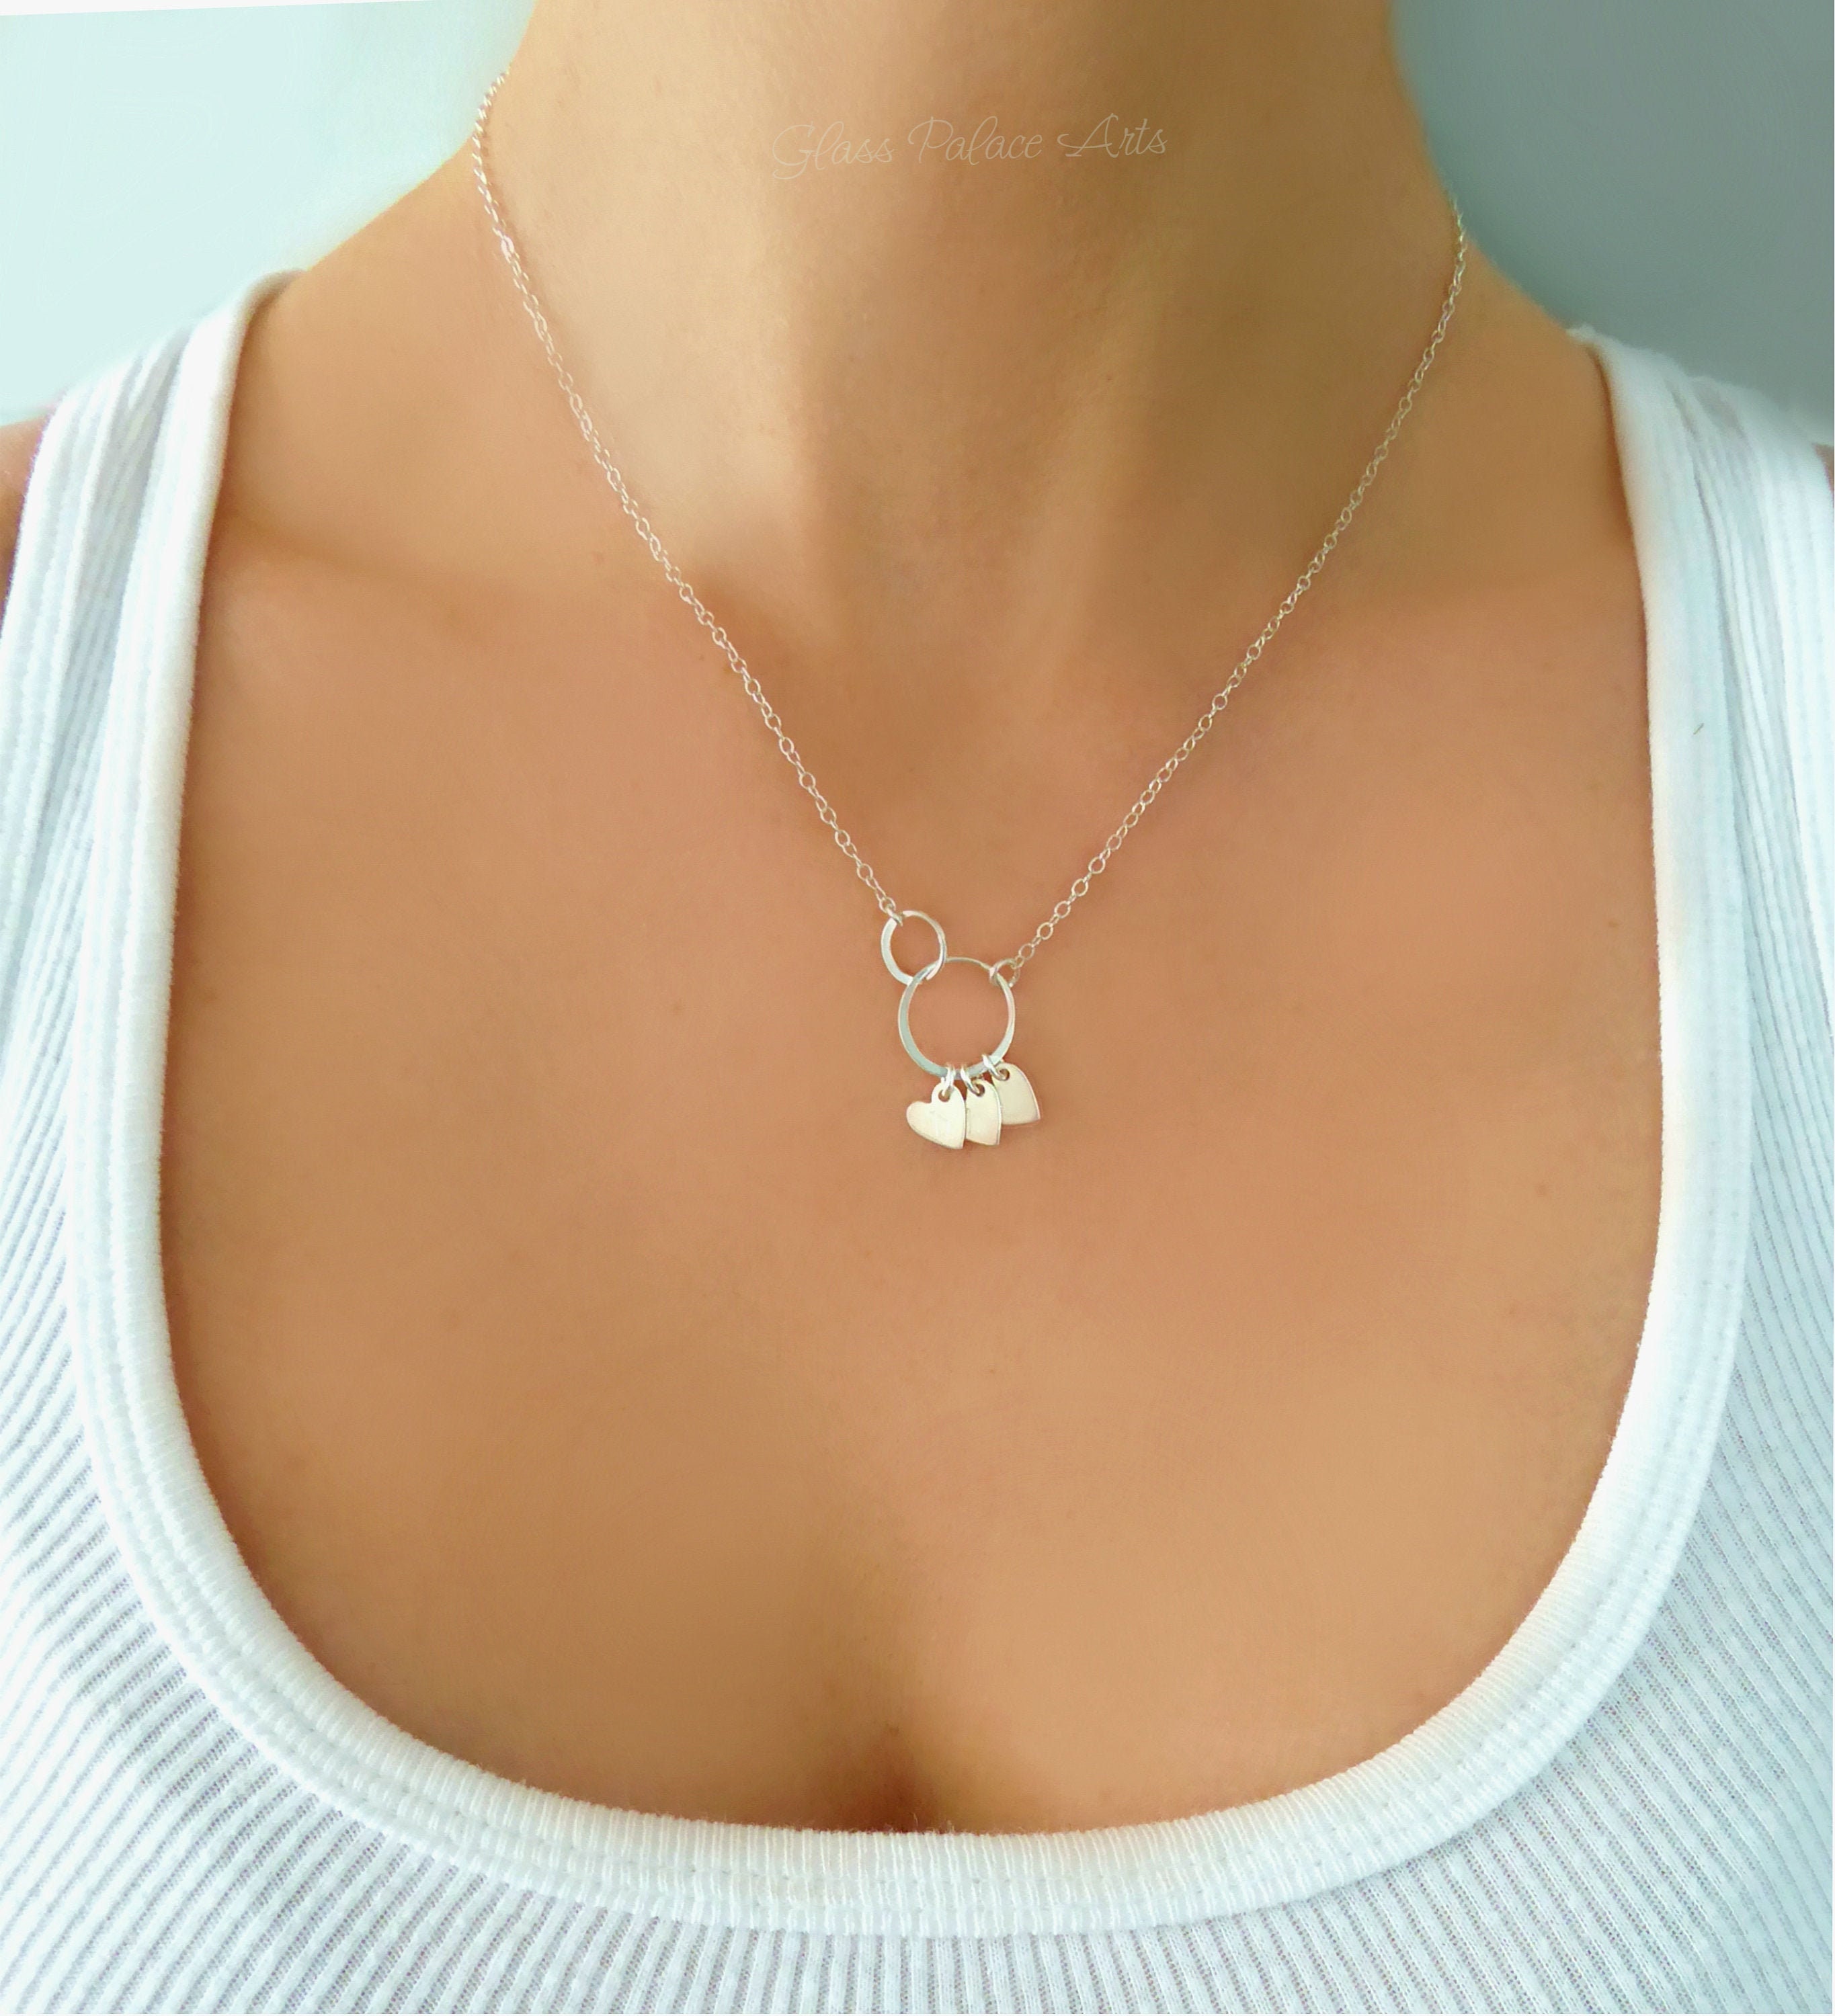 Infinity Heart Necklace 14k White Gold Finish Personalized Name Unique Gifts Store Happy Birthday Katie